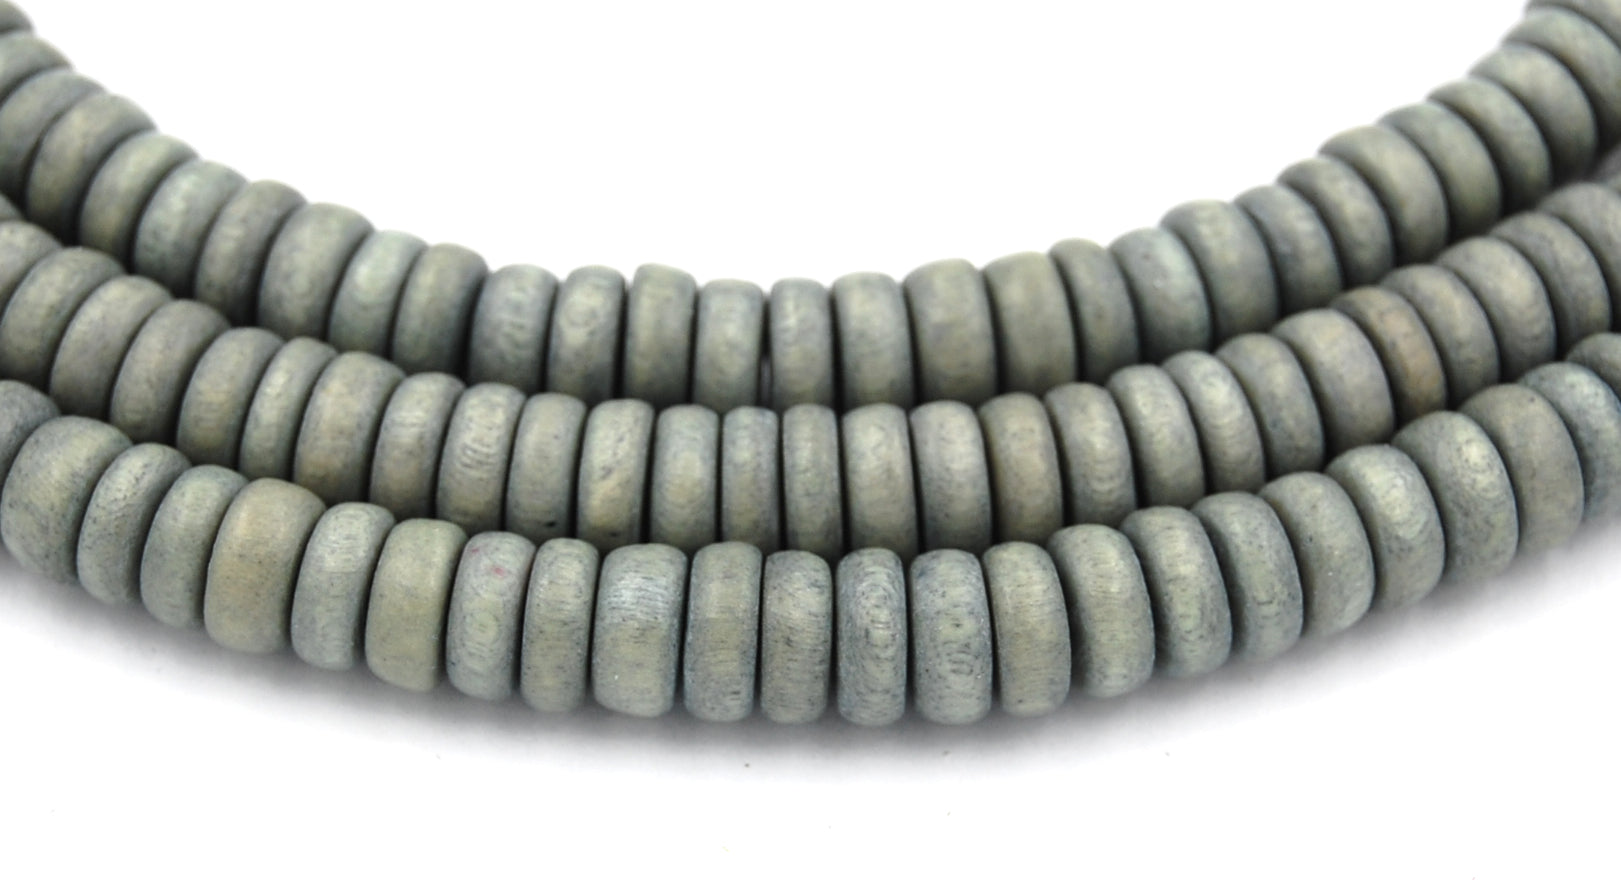 Shadow Green Wash Wood Round 6mm 8mm 10mm 12mm 8x5mm Rondelle Light Green Boho Wood Beads Earth Green/Gray Beads -16 inch strand